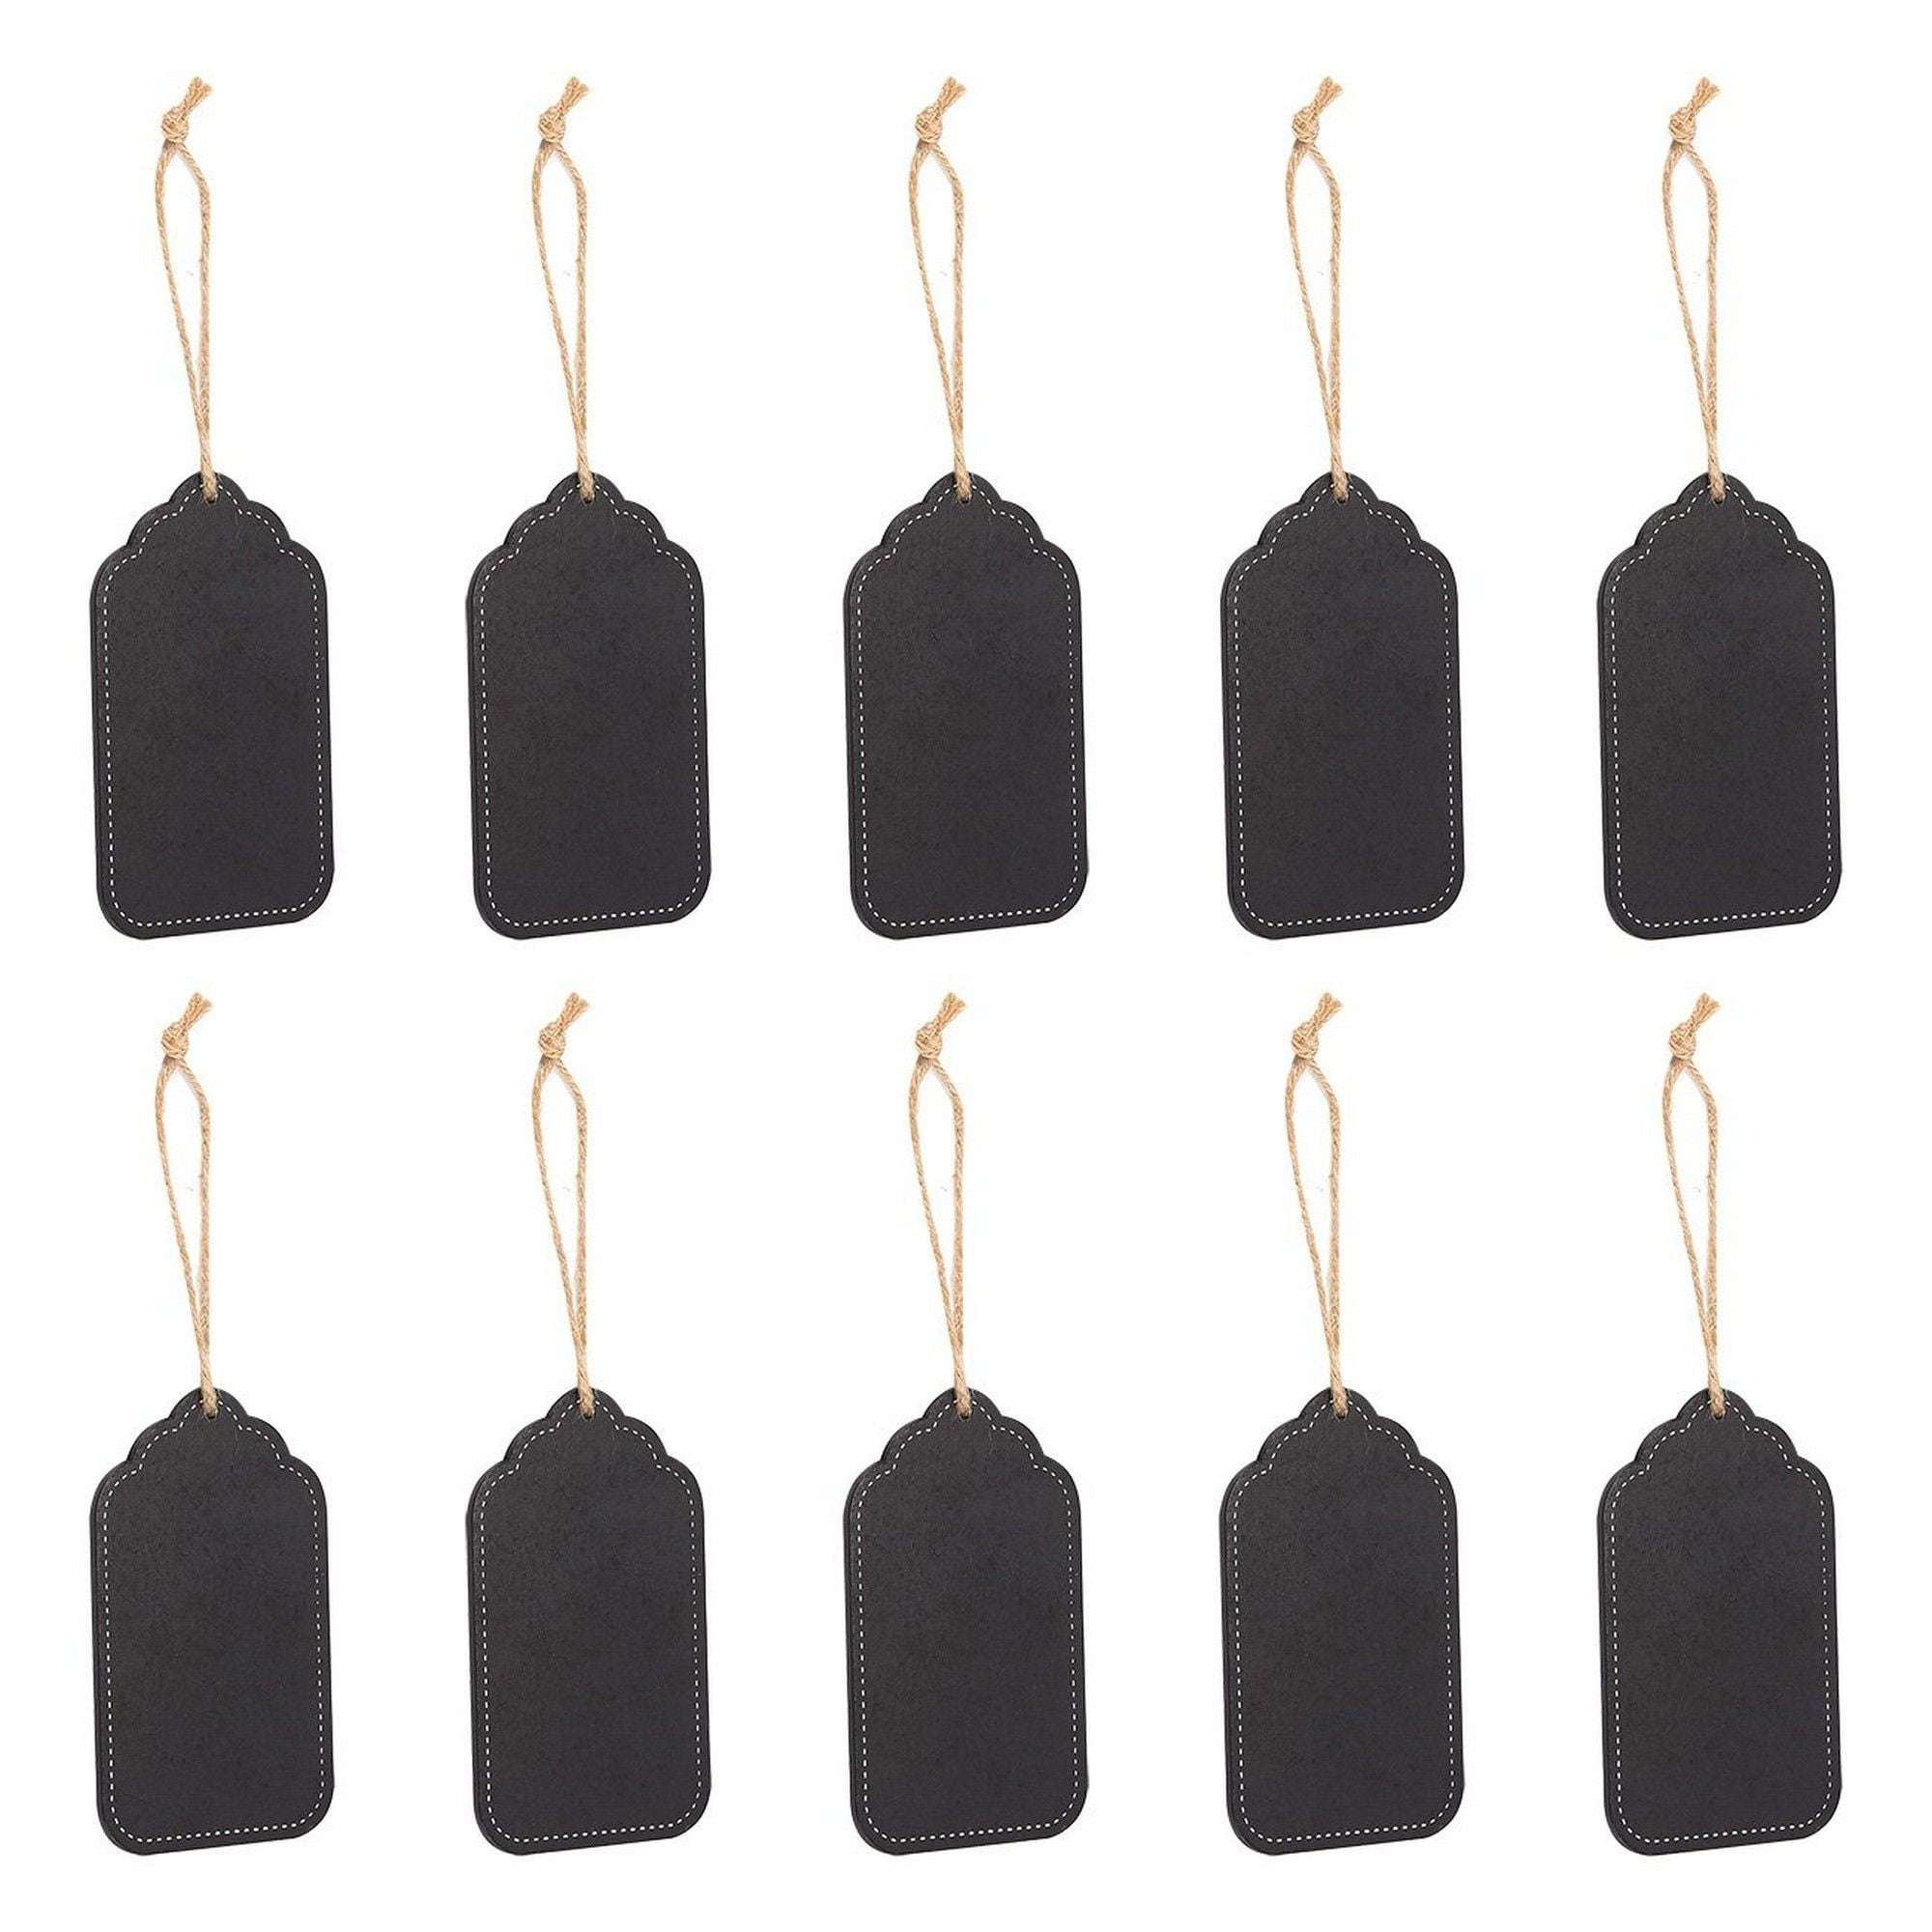 Gifts 10 Mini Chalkboard Hanging Tag Wedding Party Favors Storage Black/Wood 